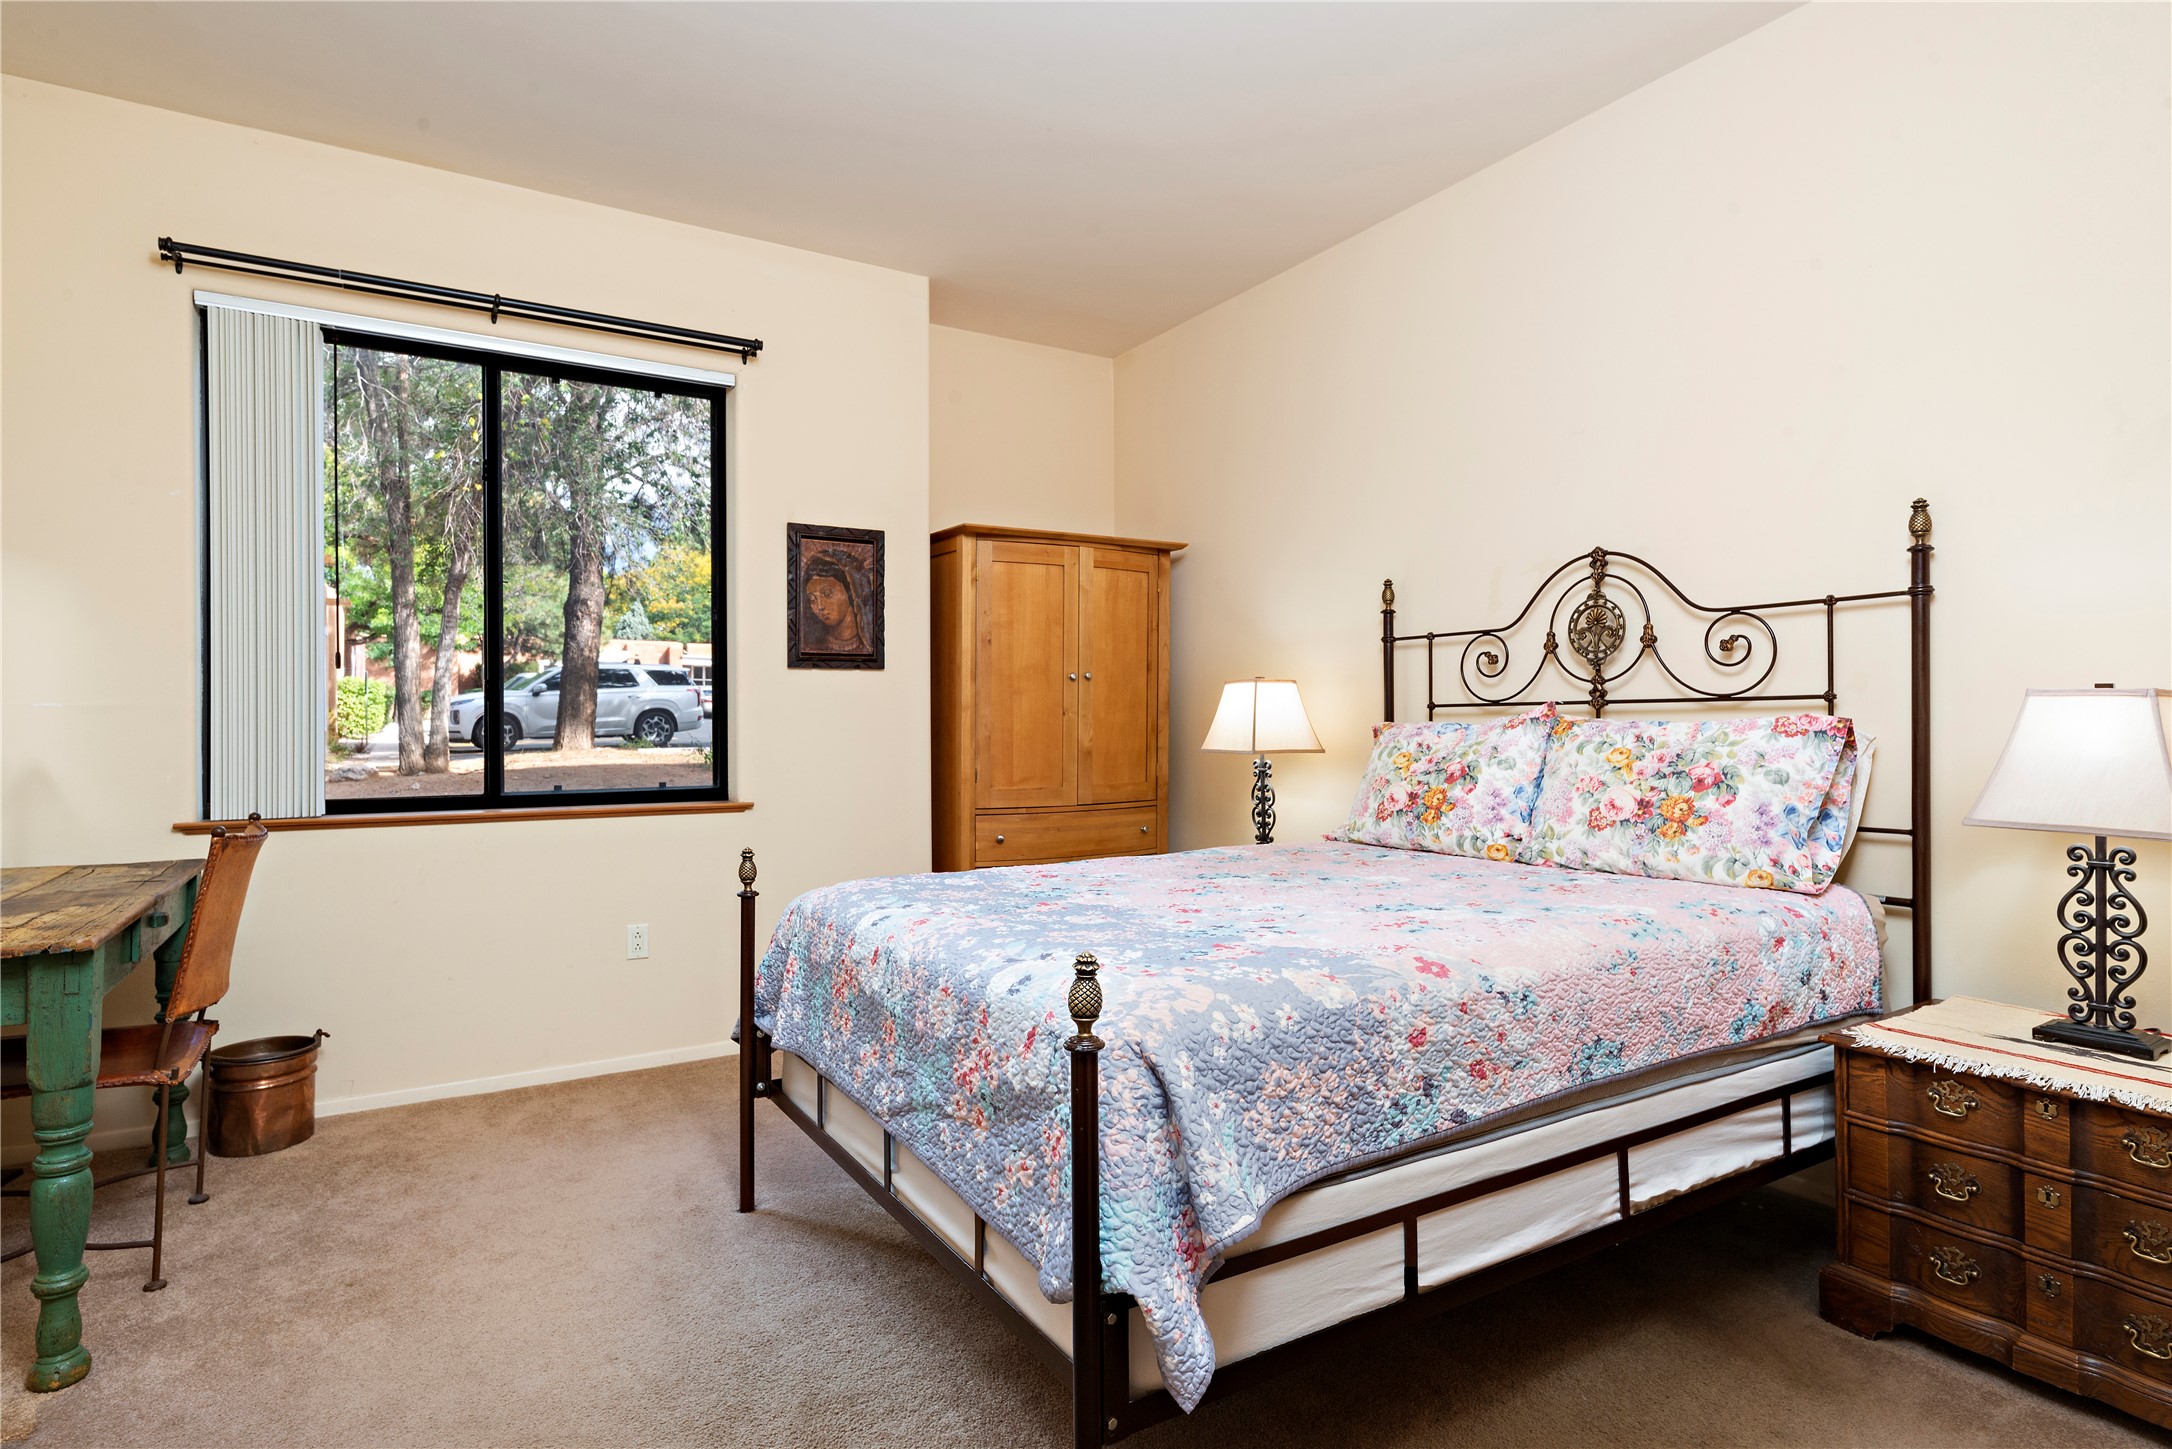 Large bedroom with ample space for a desk and other furniture.